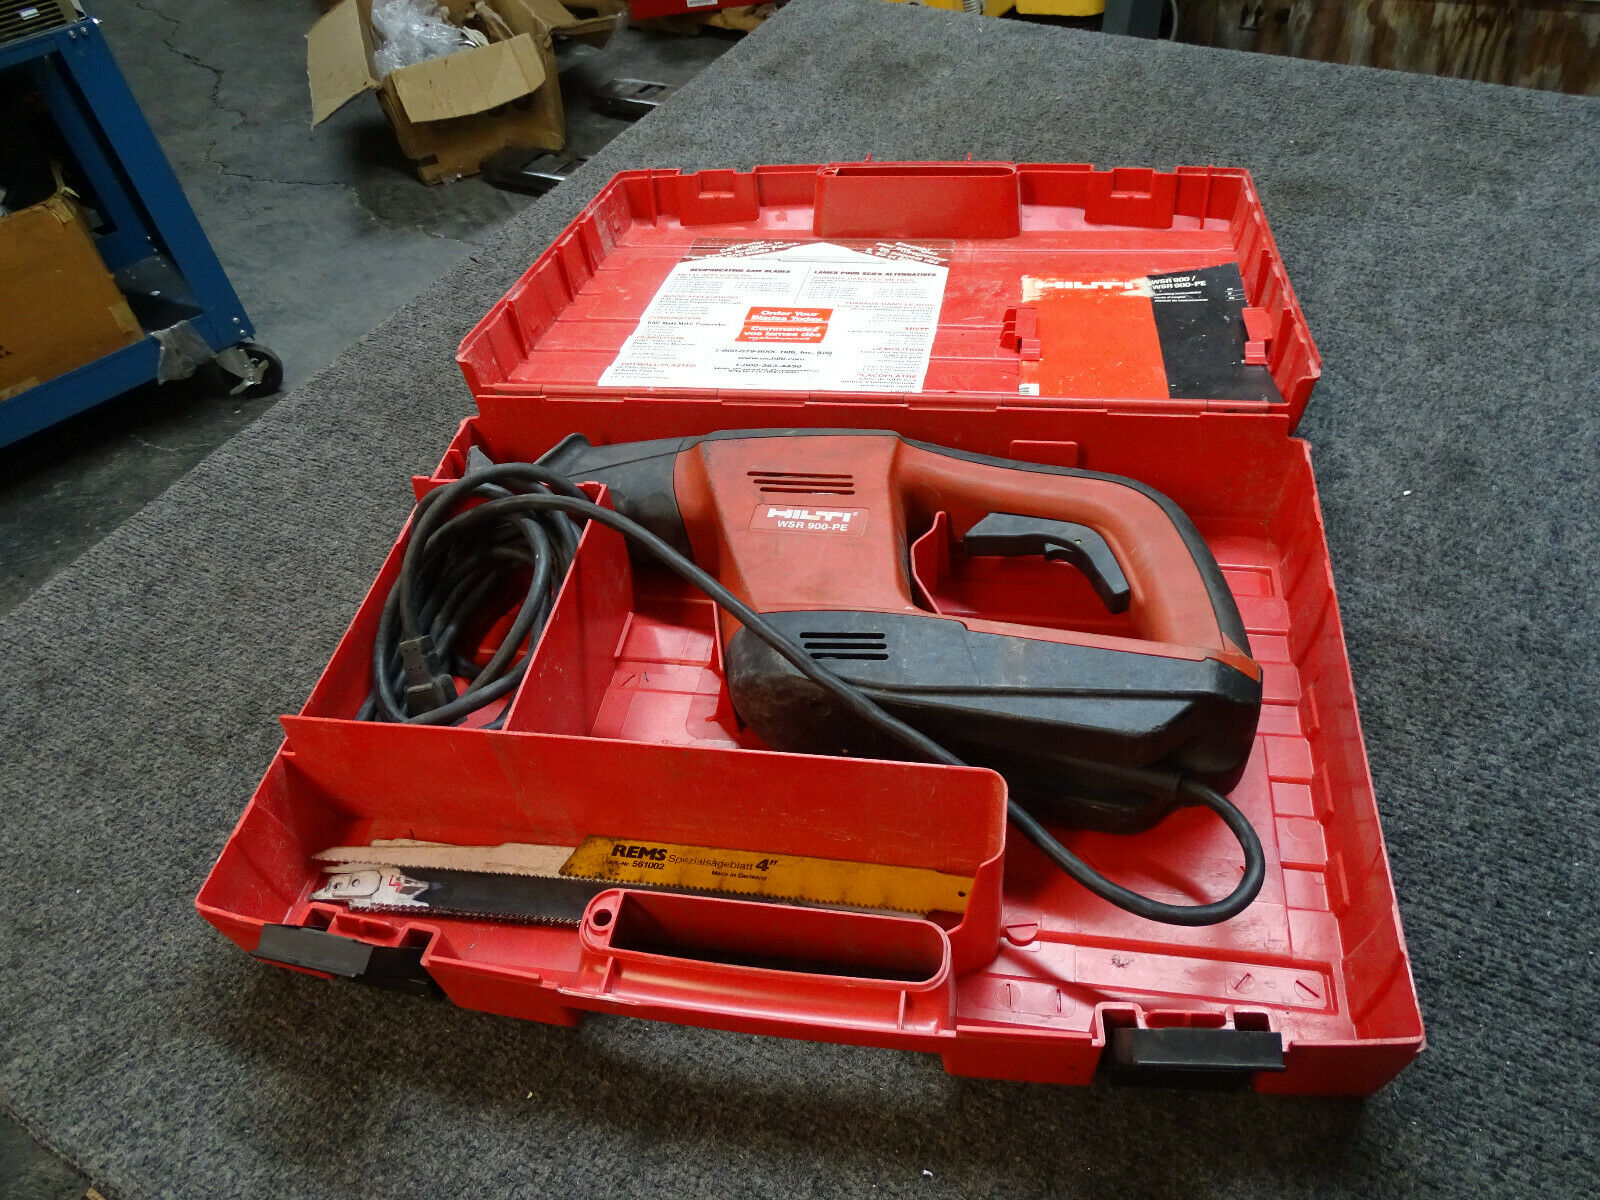 Hilti Wsr 900-pe Variable Corded Reciprocating Saw W/ Manual & Case / Blades